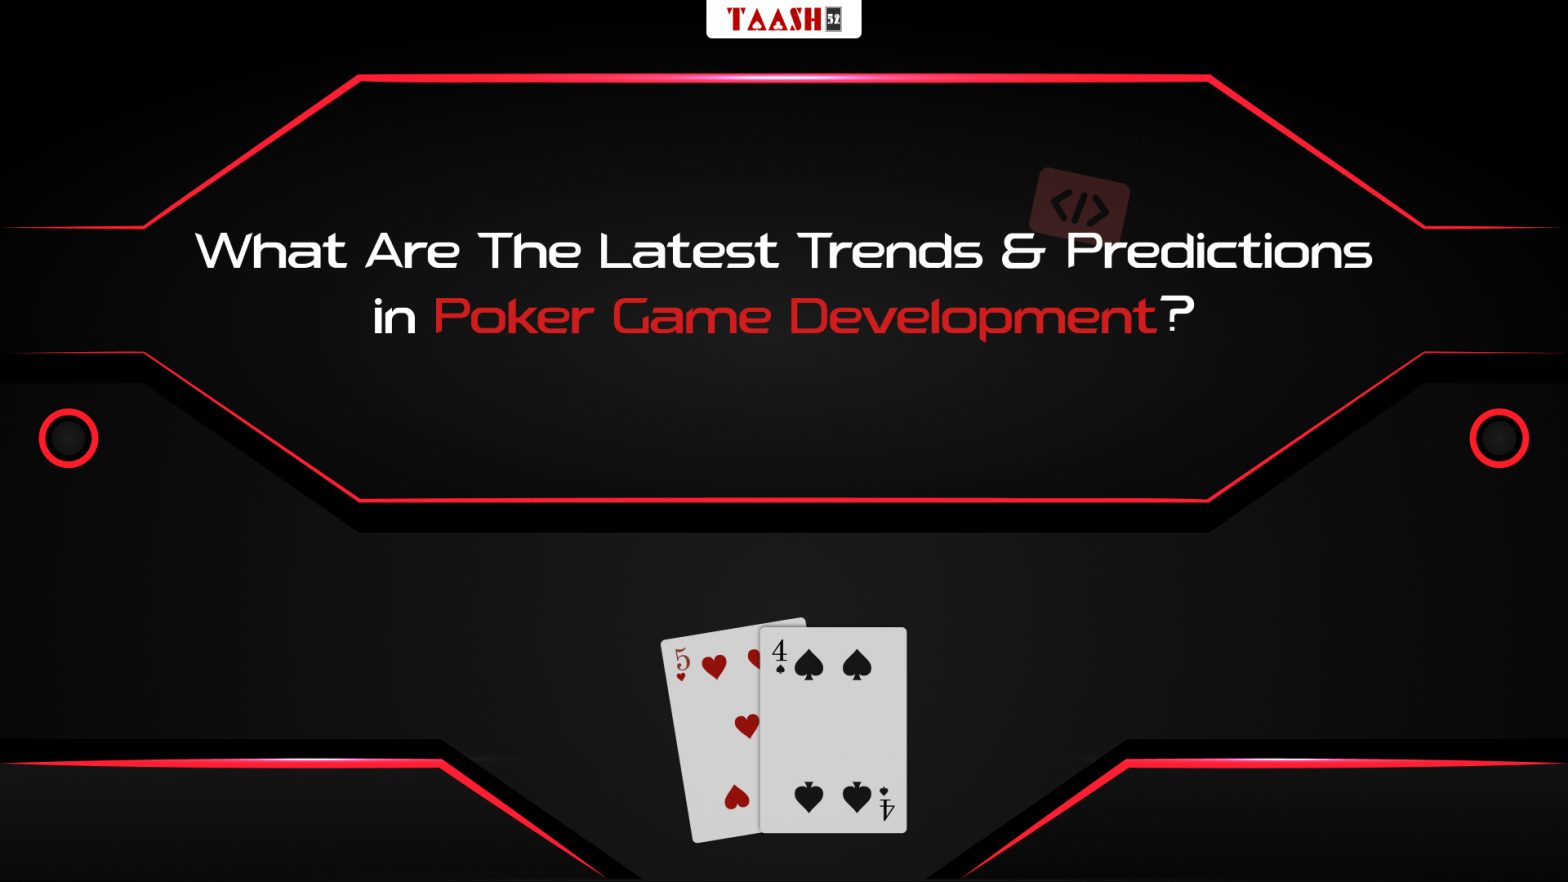 what are the latest trends & predictions in poker game development?